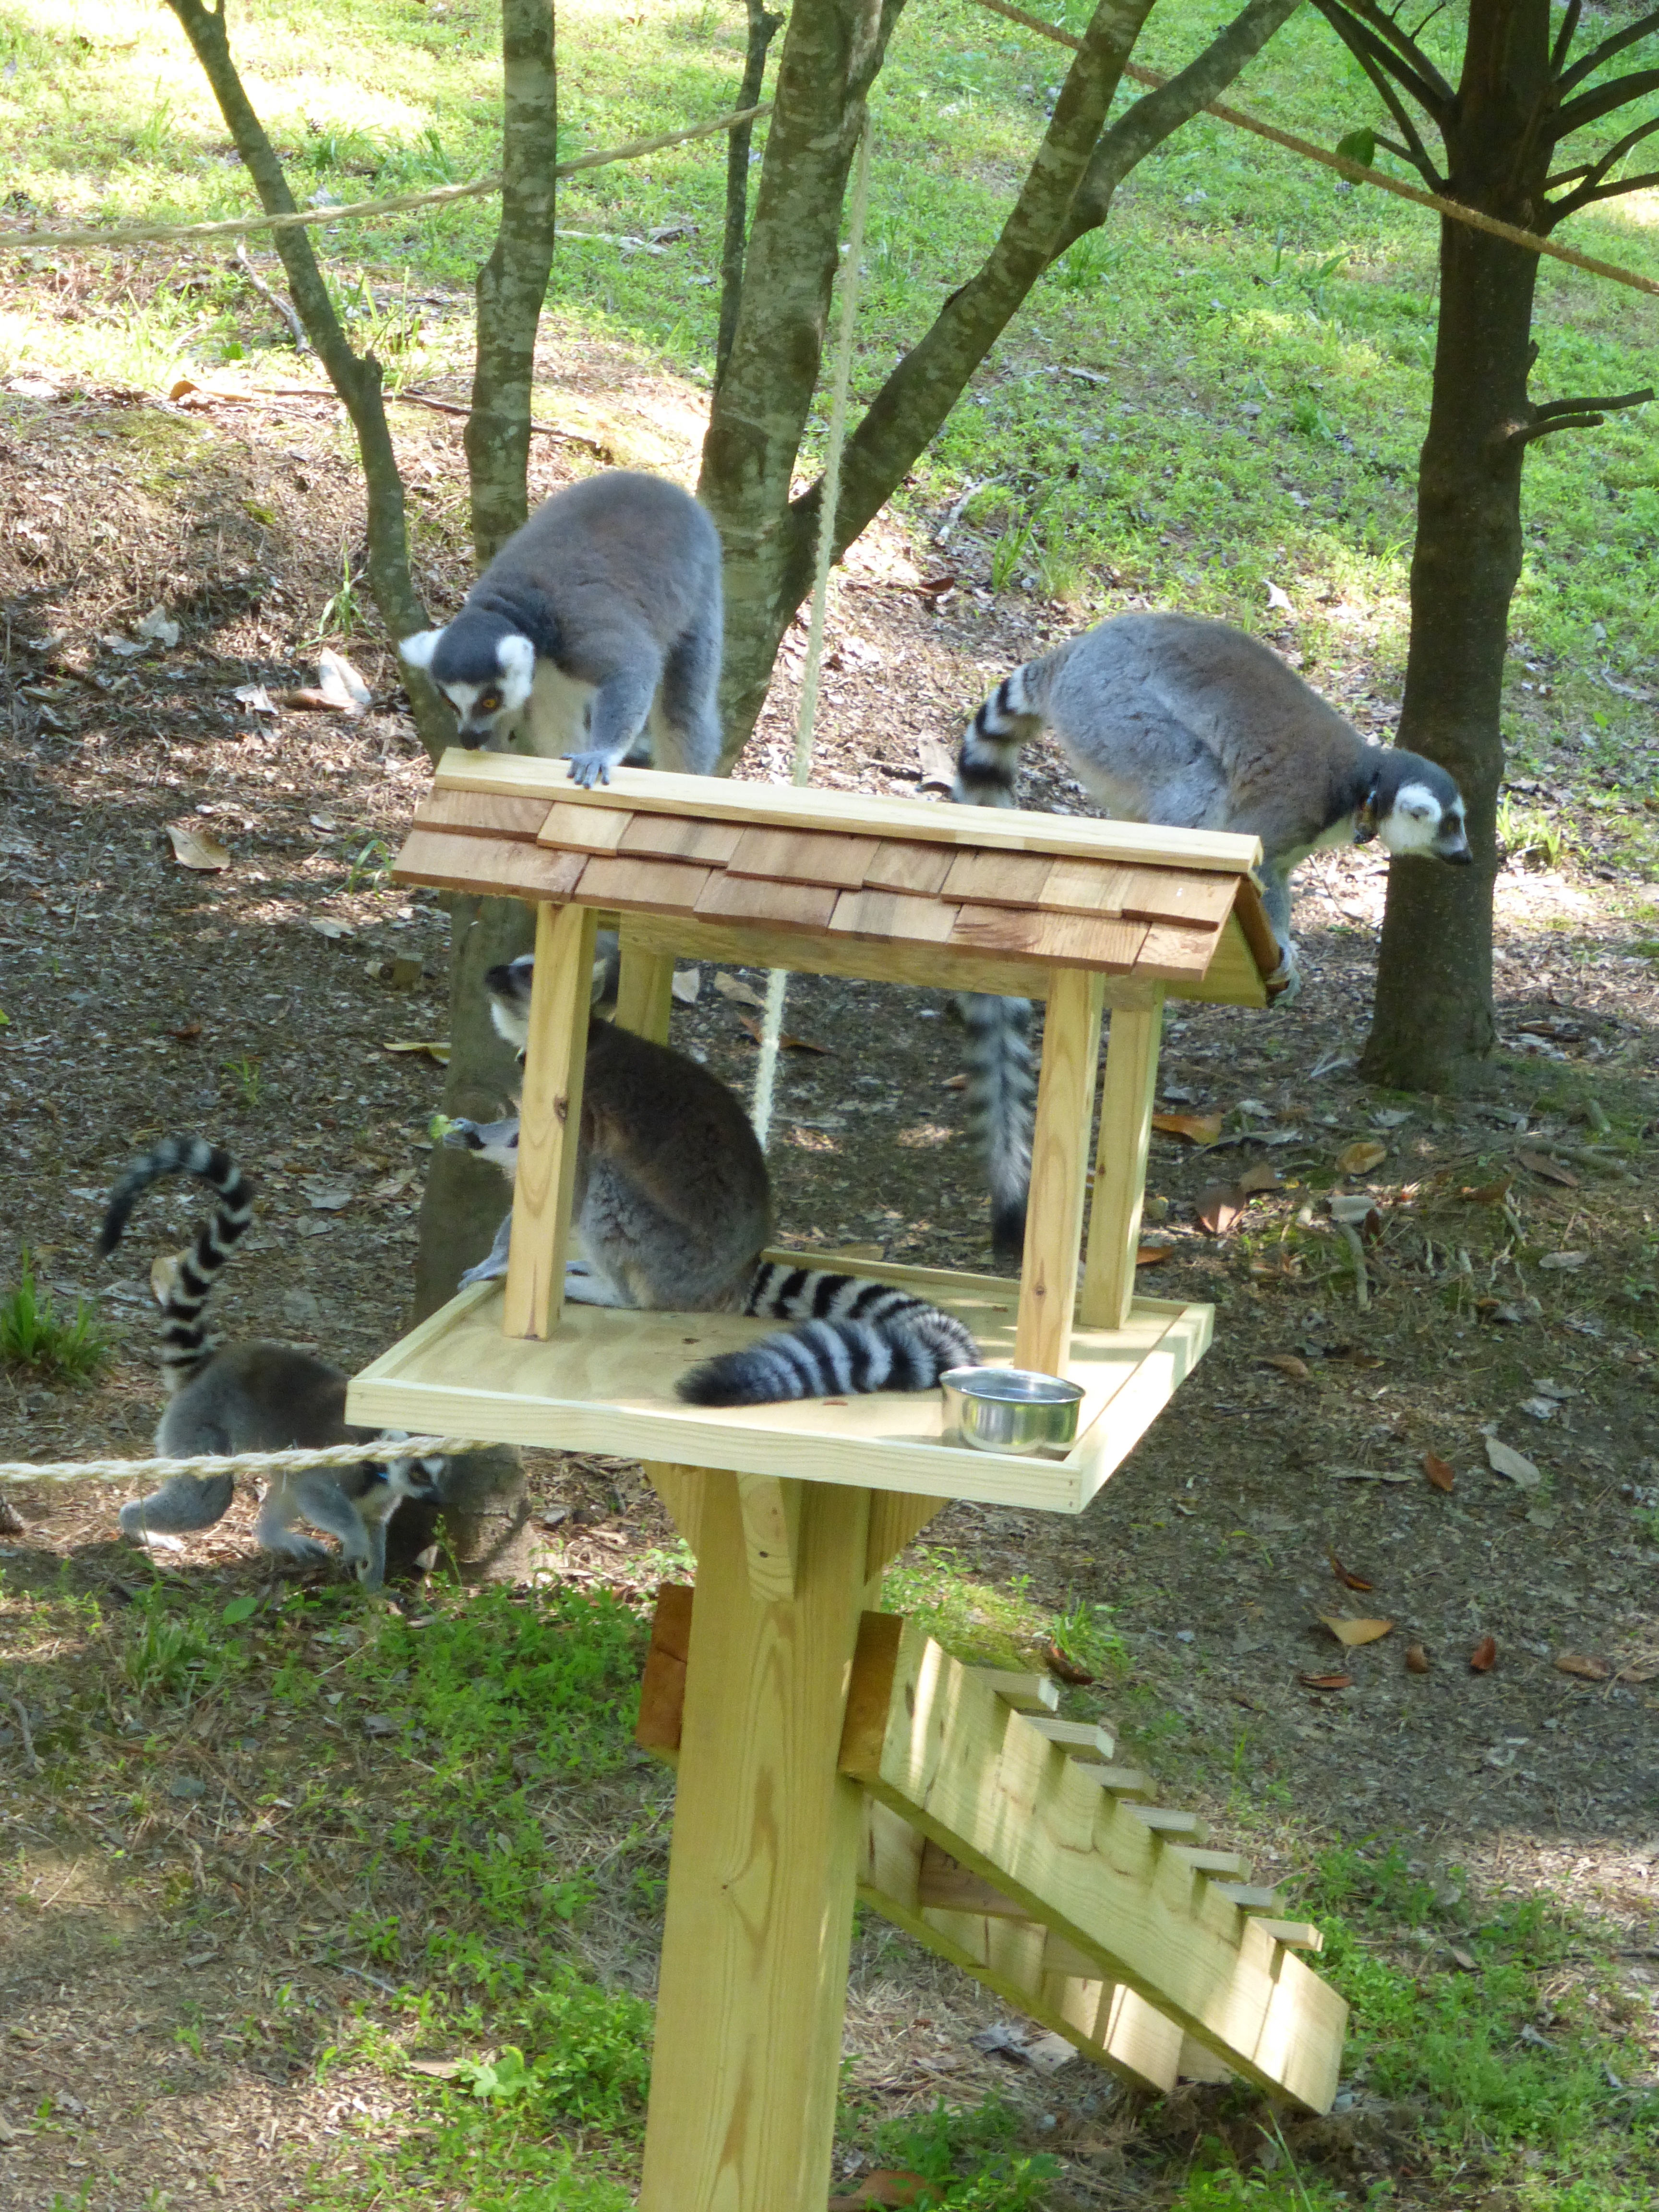 Lemurs trying out the new tree houses!